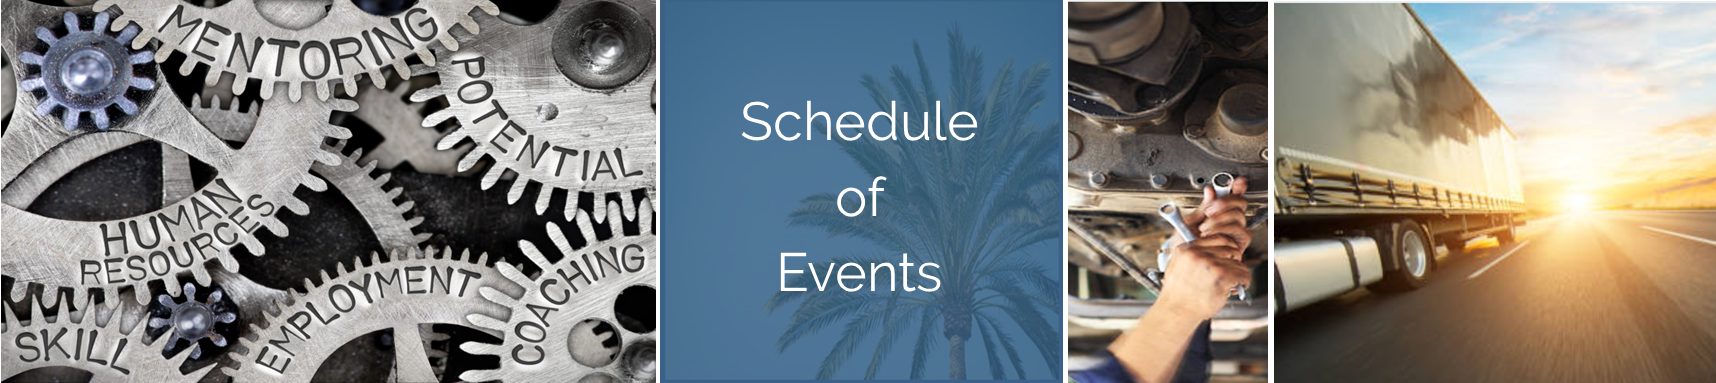 Annual Councils conference webpage SCHEDULED Events FINAL 8-7-21